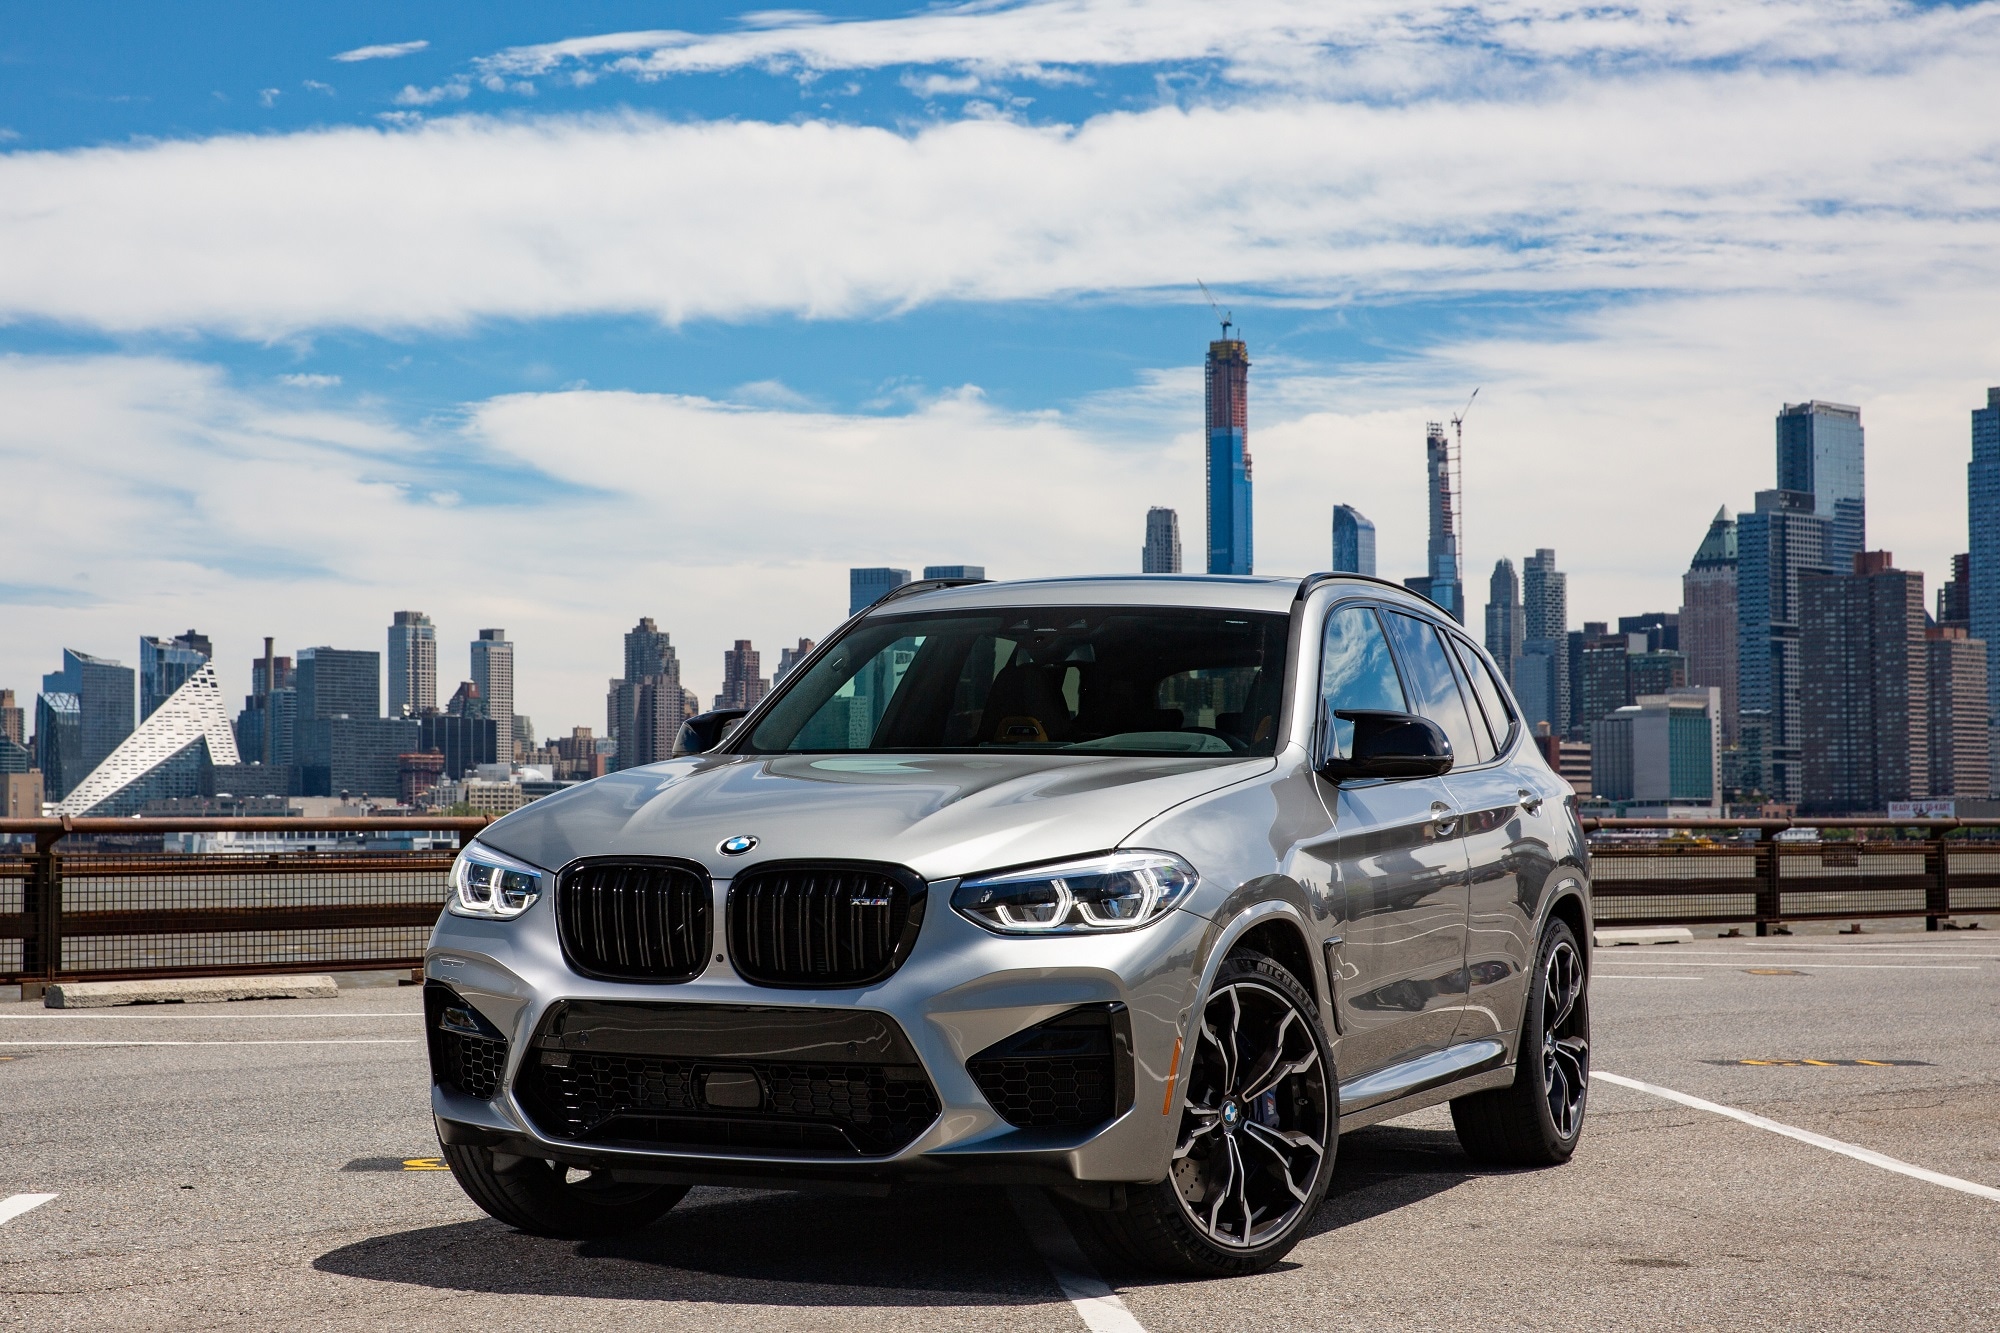 BMW X3 M appears to attach as much emphasis to style as it does to performance.